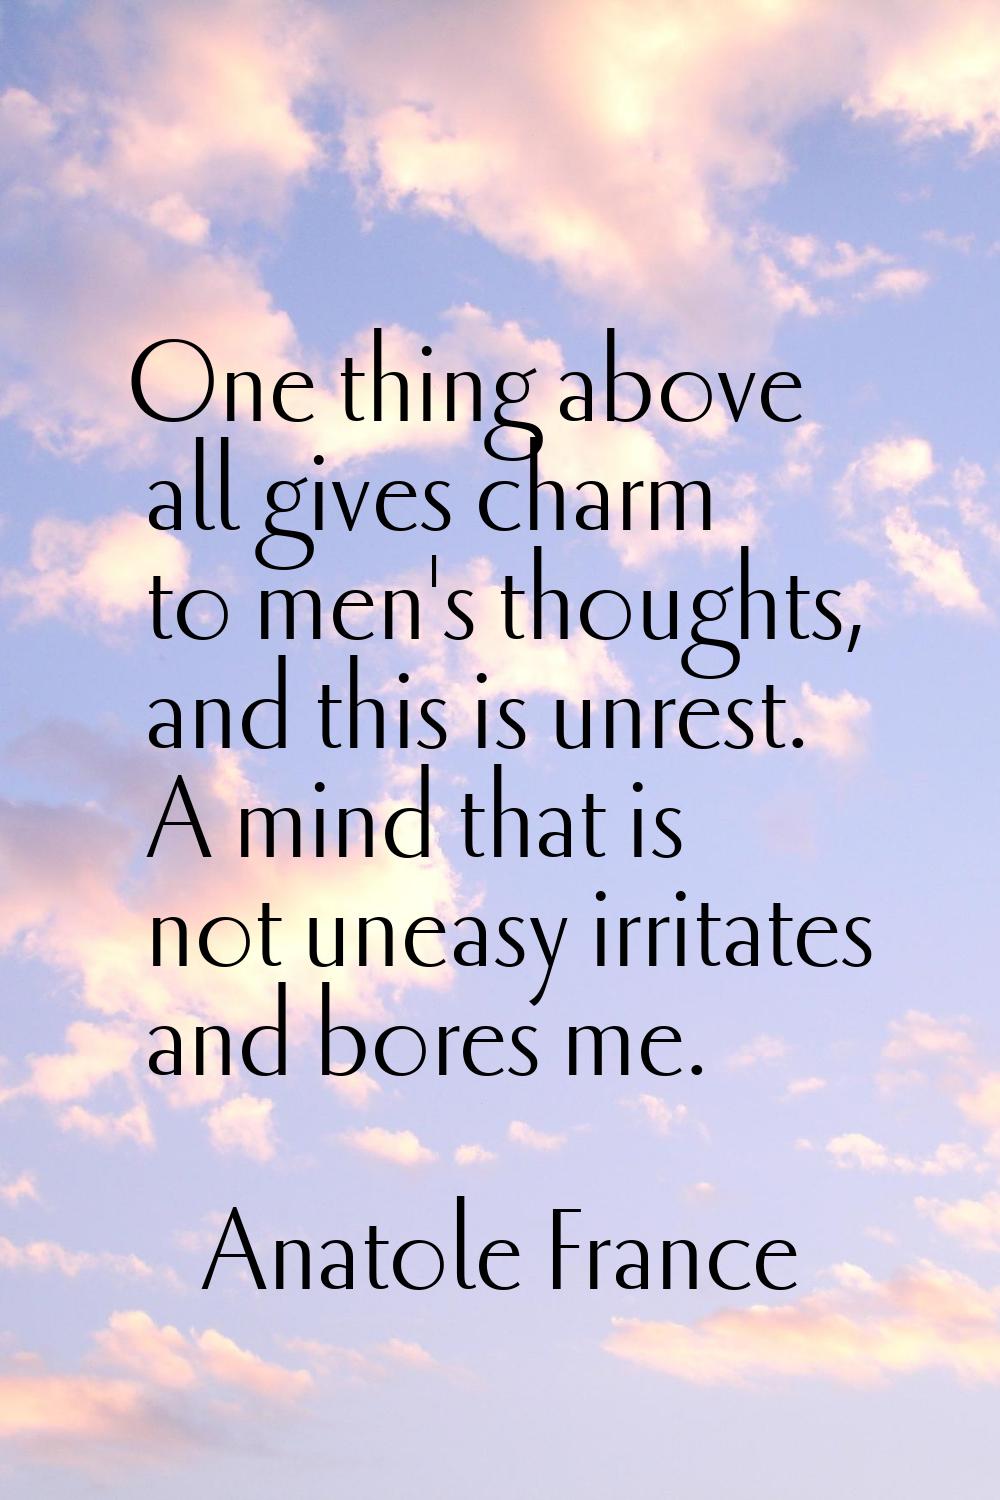 One thing above all gives charm to men's thoughts, and this is unrest. A mind that is not uneasy ir